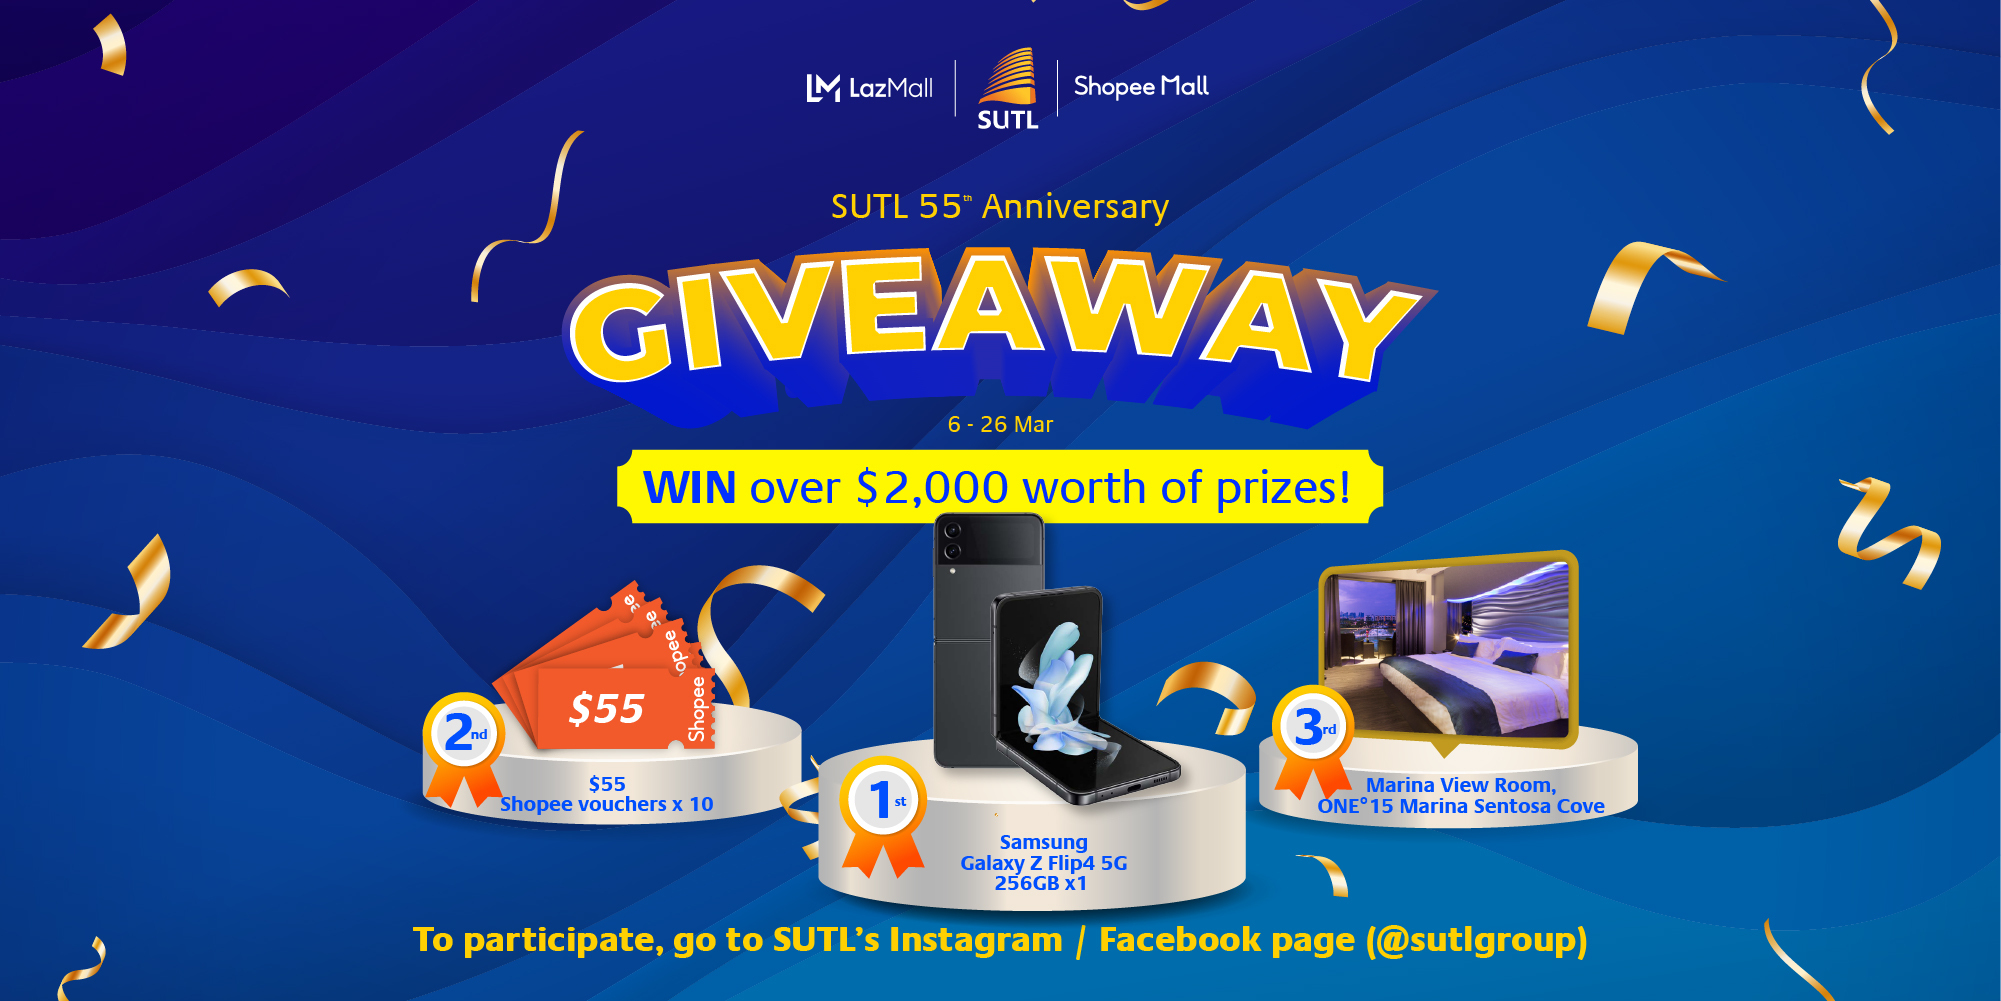 Singha Scratch and Win